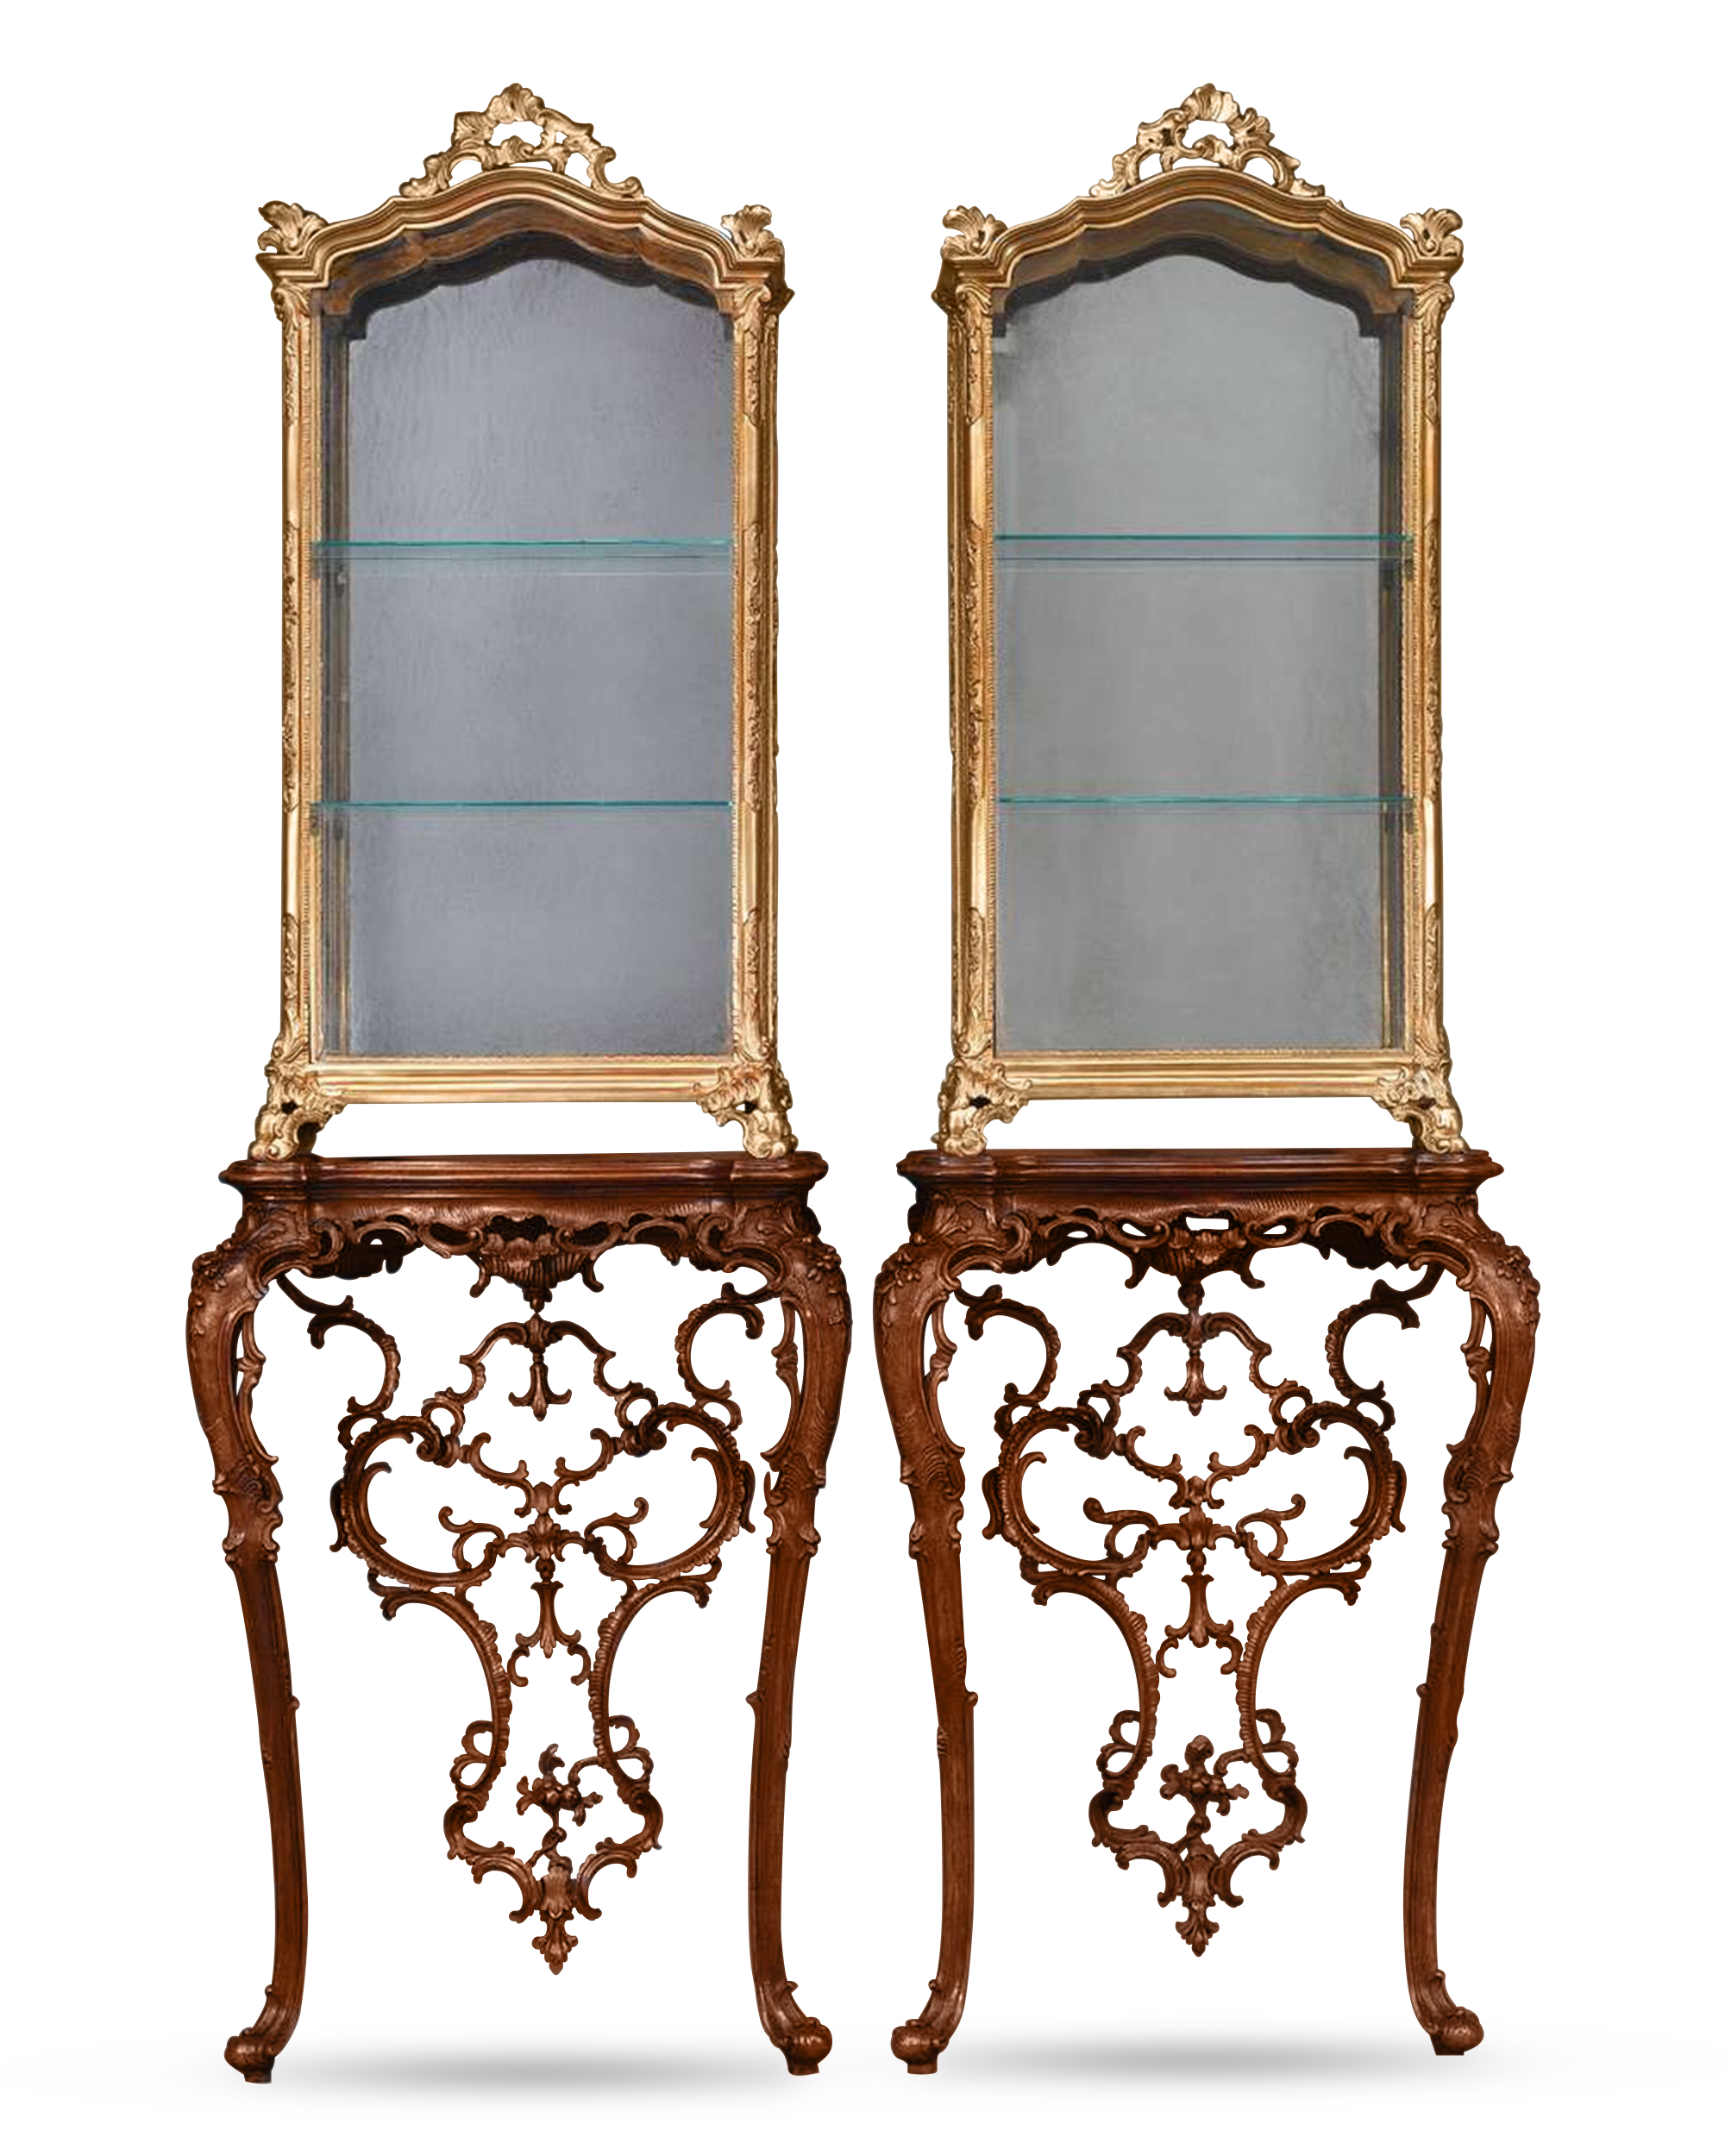 These 19th-century vitrines are elegant examples of the Rococo style